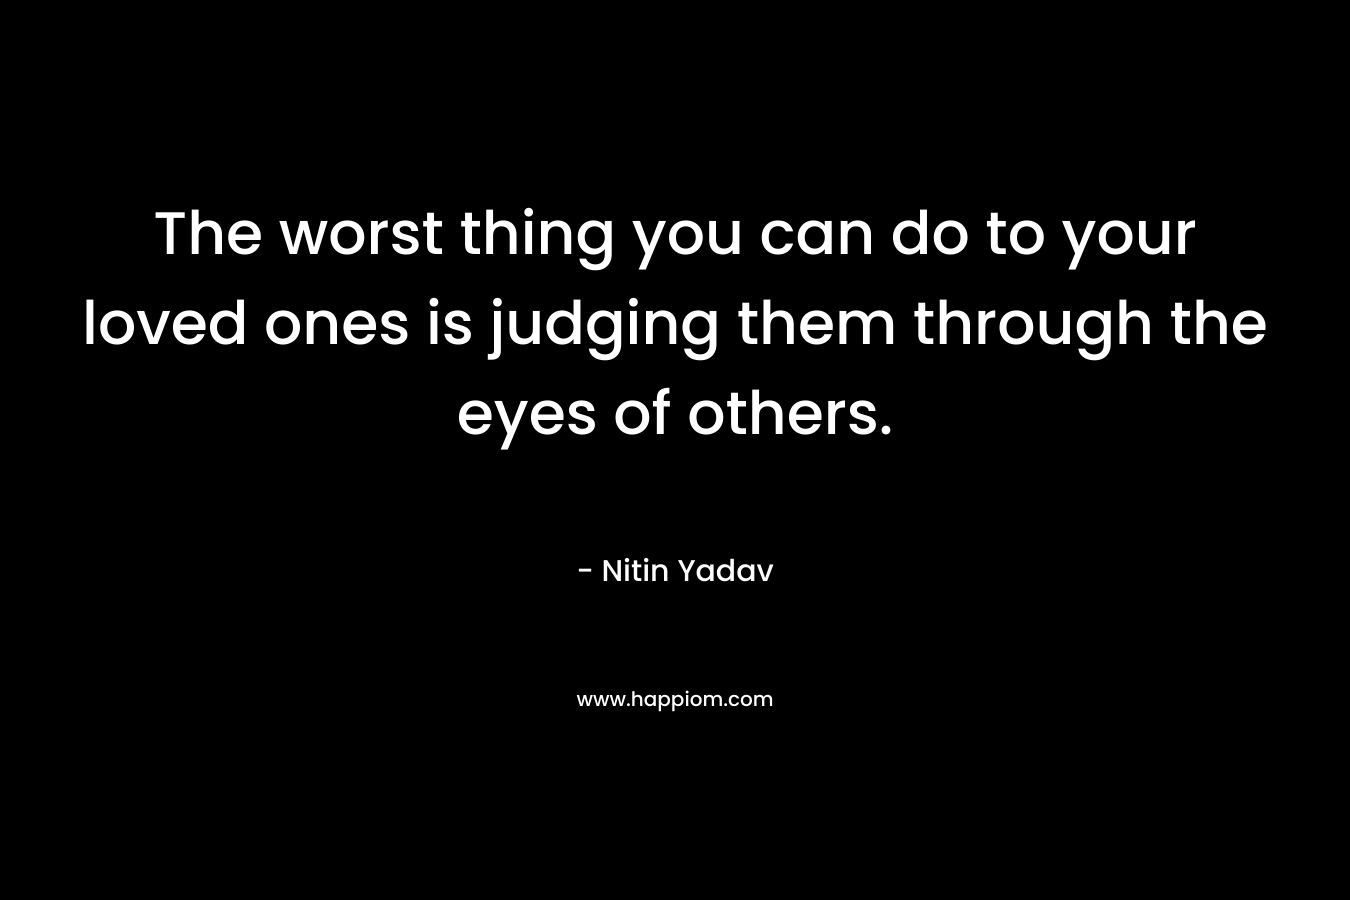 The worst thing you can do to your loved ones is judging them through the eyes of others. – Nitin Yadav